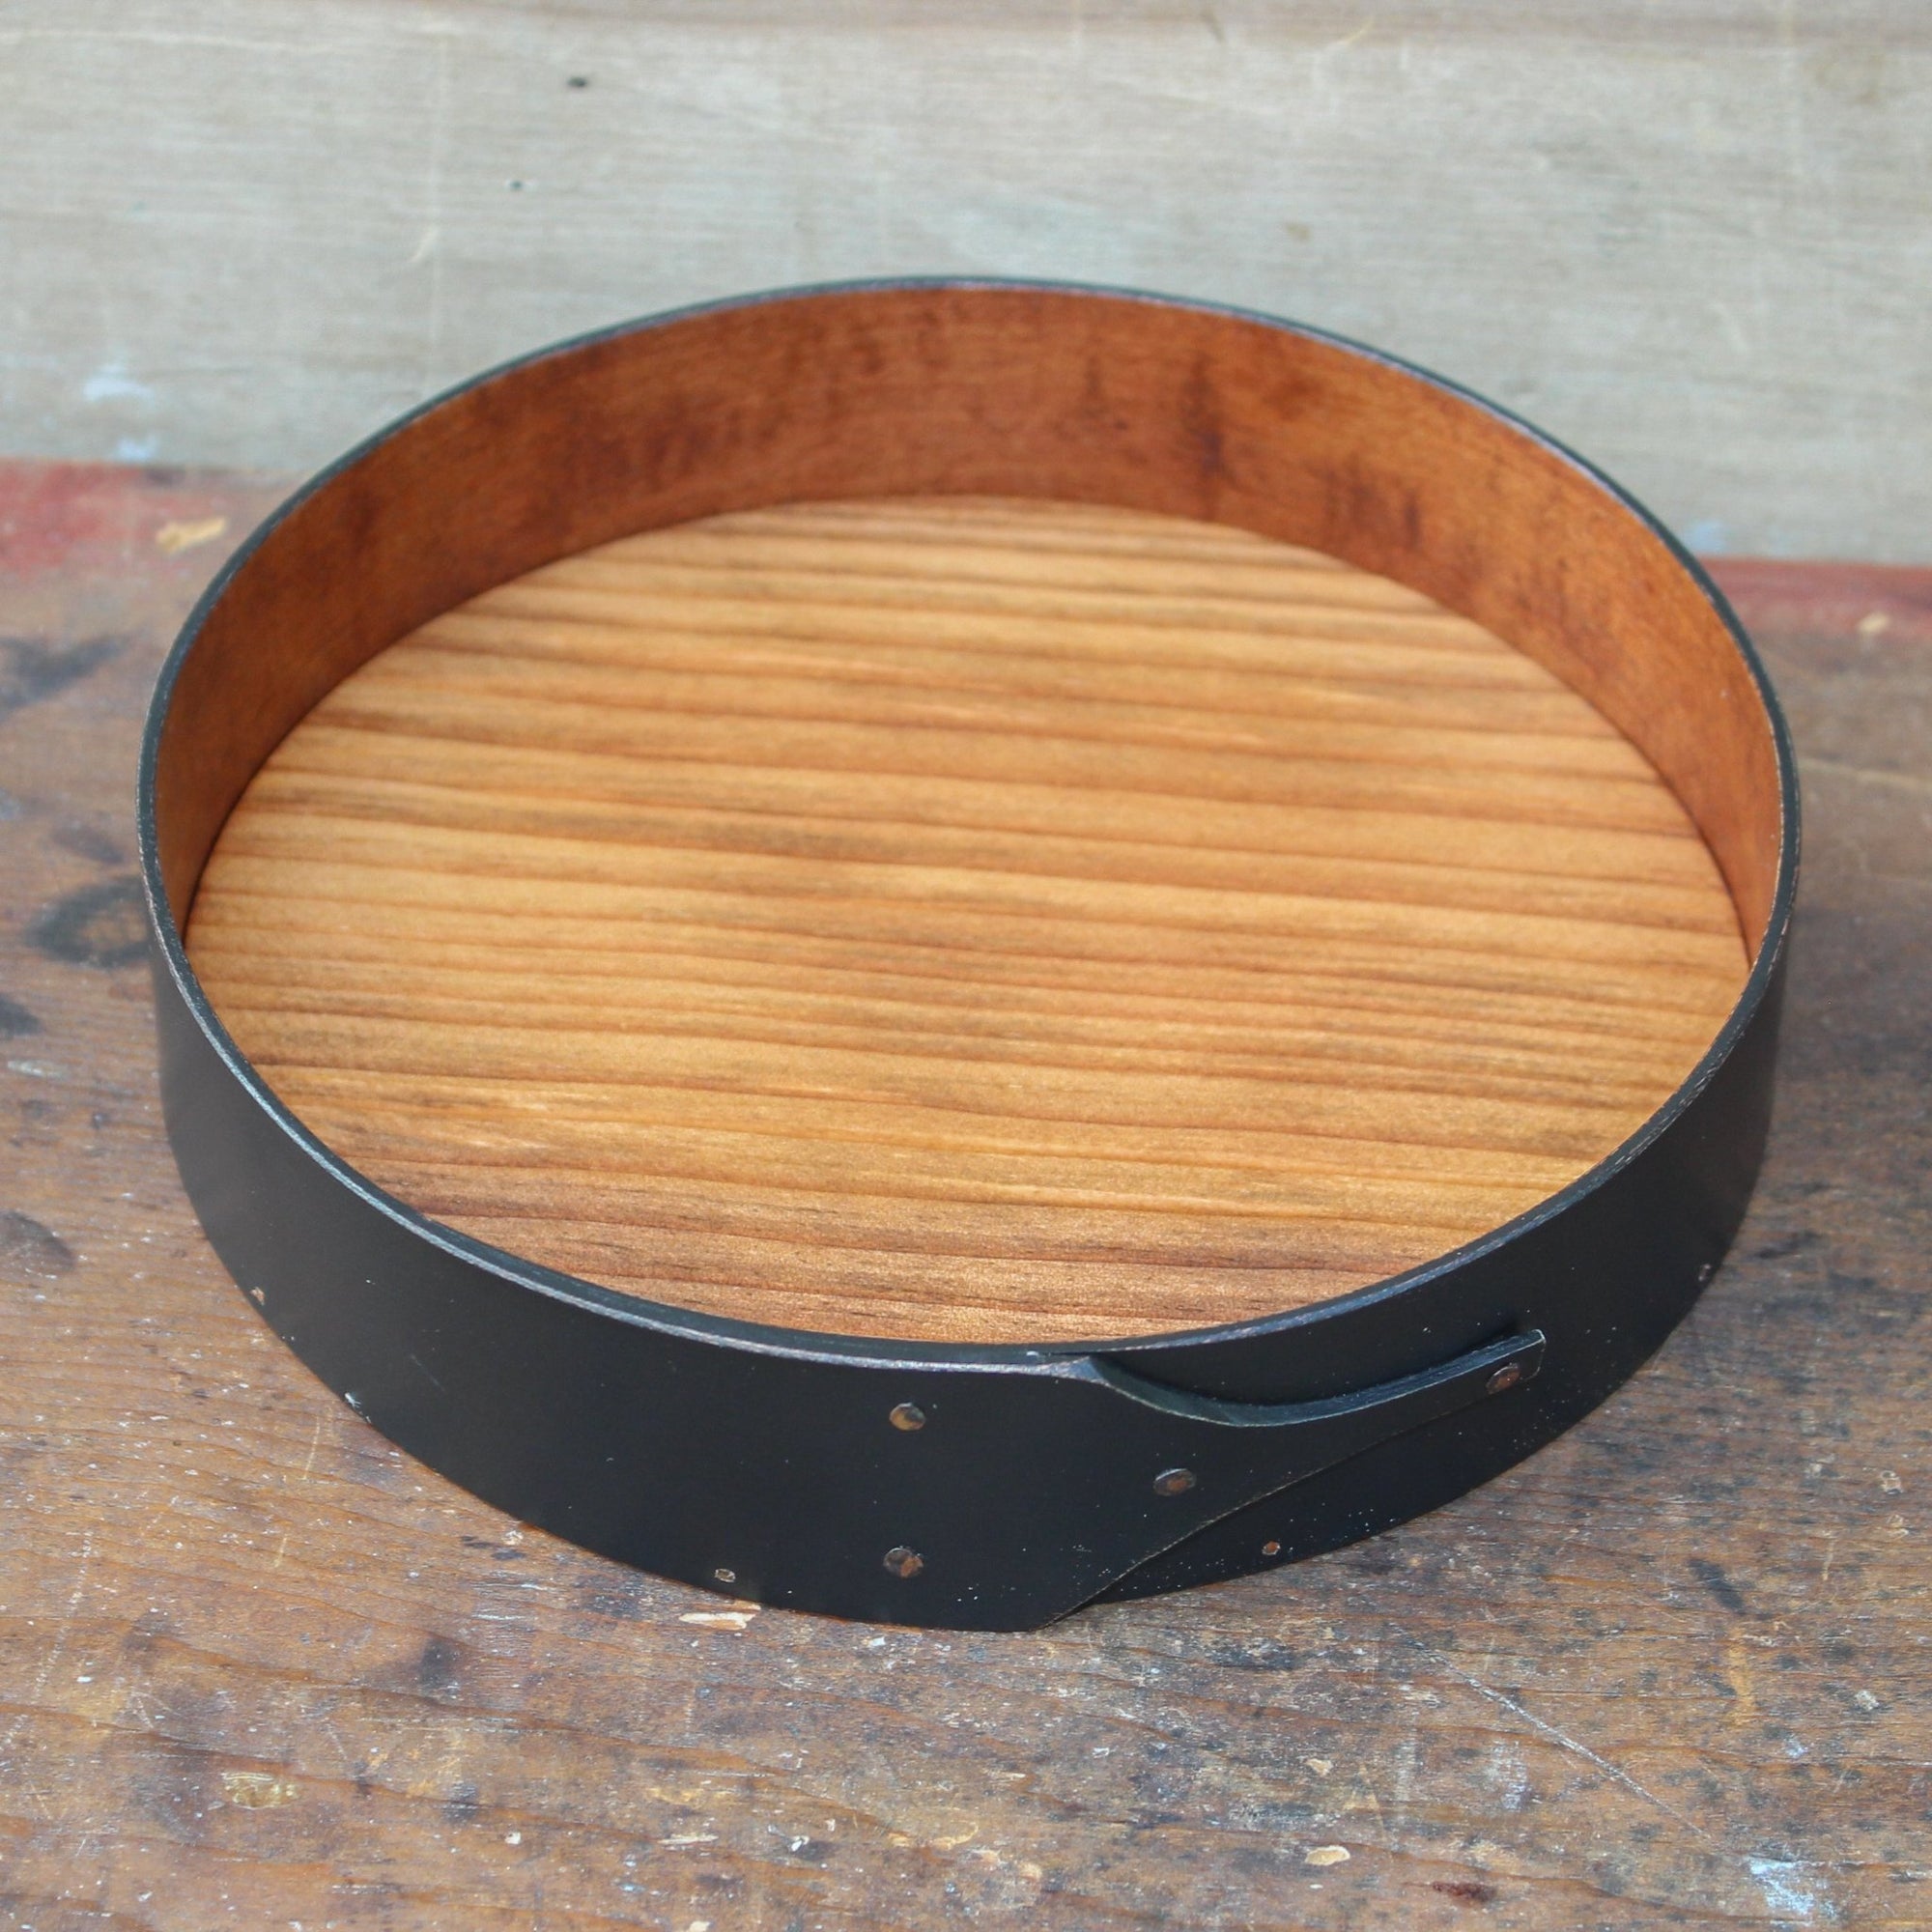 Shaker Style Round Stitchers Tray, LeHays Shaker Boxes, Handcrafted in Maine, Black Milk Paint Finish, Top View